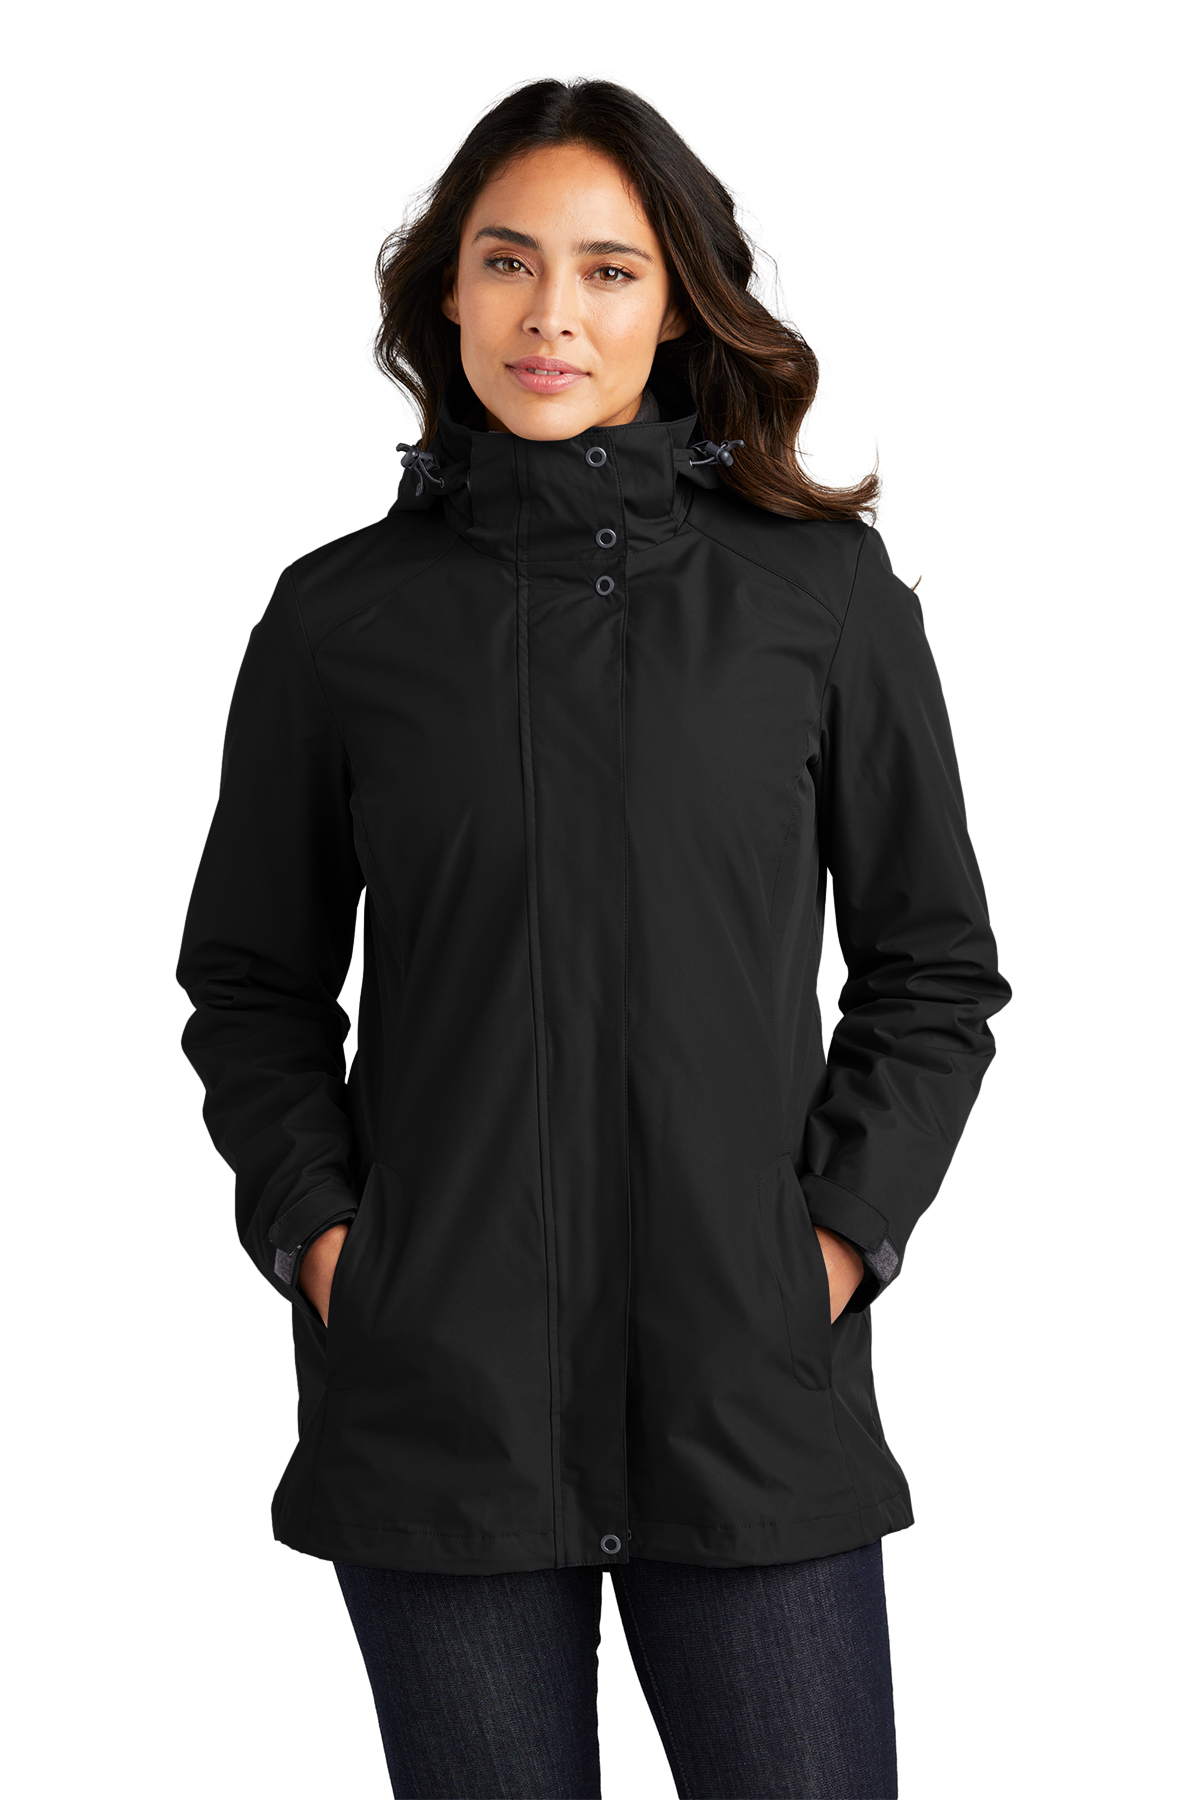 Port Authority® Ladies All-Weather 3-in-1 Jacket